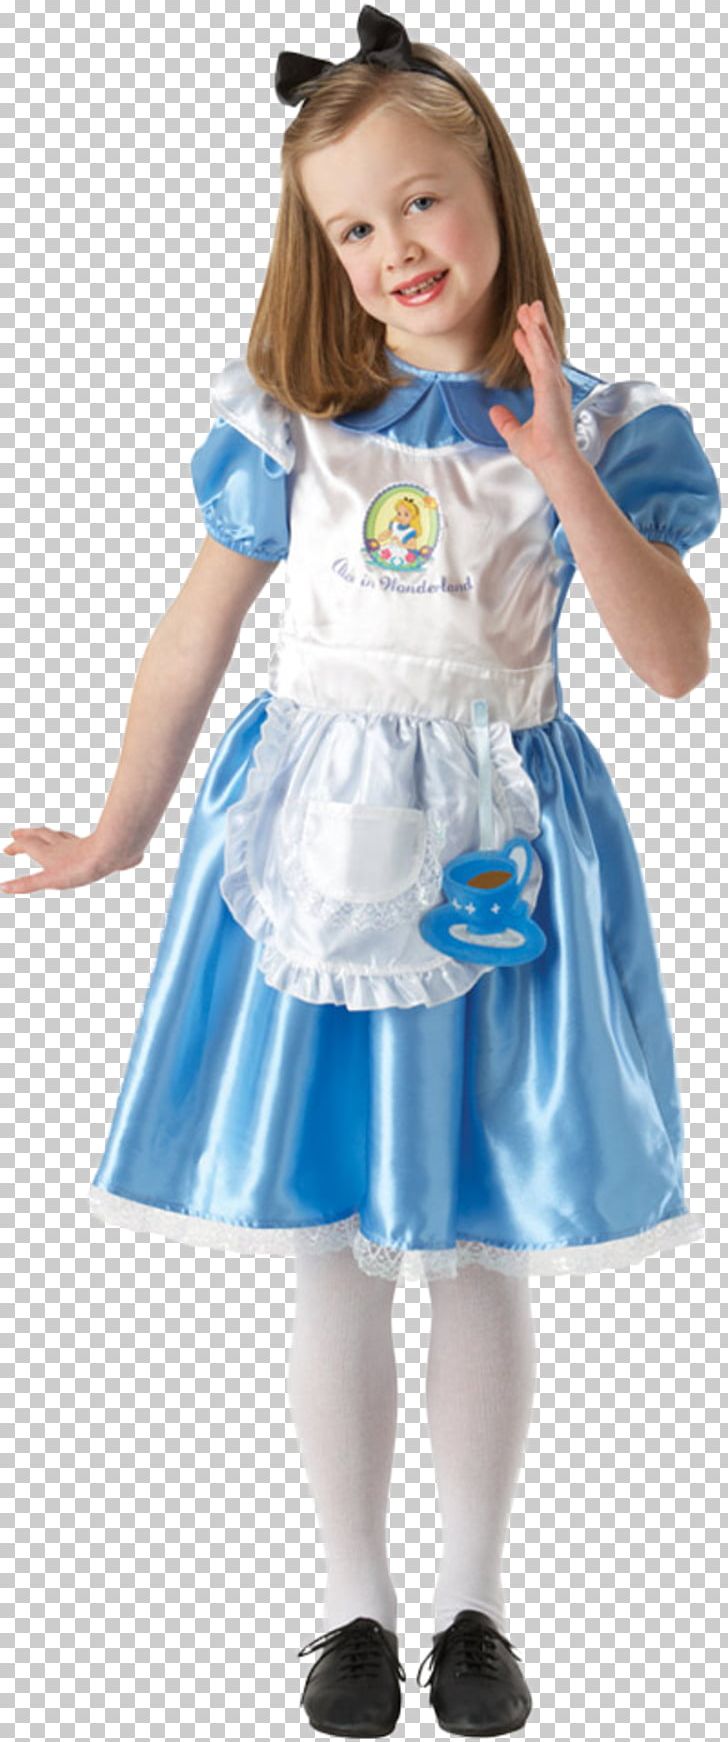 Alice In Wonderland The Mad Hatter Alice's Adventures In Wonderland Costume Party PNG, Clipart, Alice, Alice In Wonderland, Alice In Wonderland Dress, Alices Adventures In Wonderland, Blue Free PNG Download